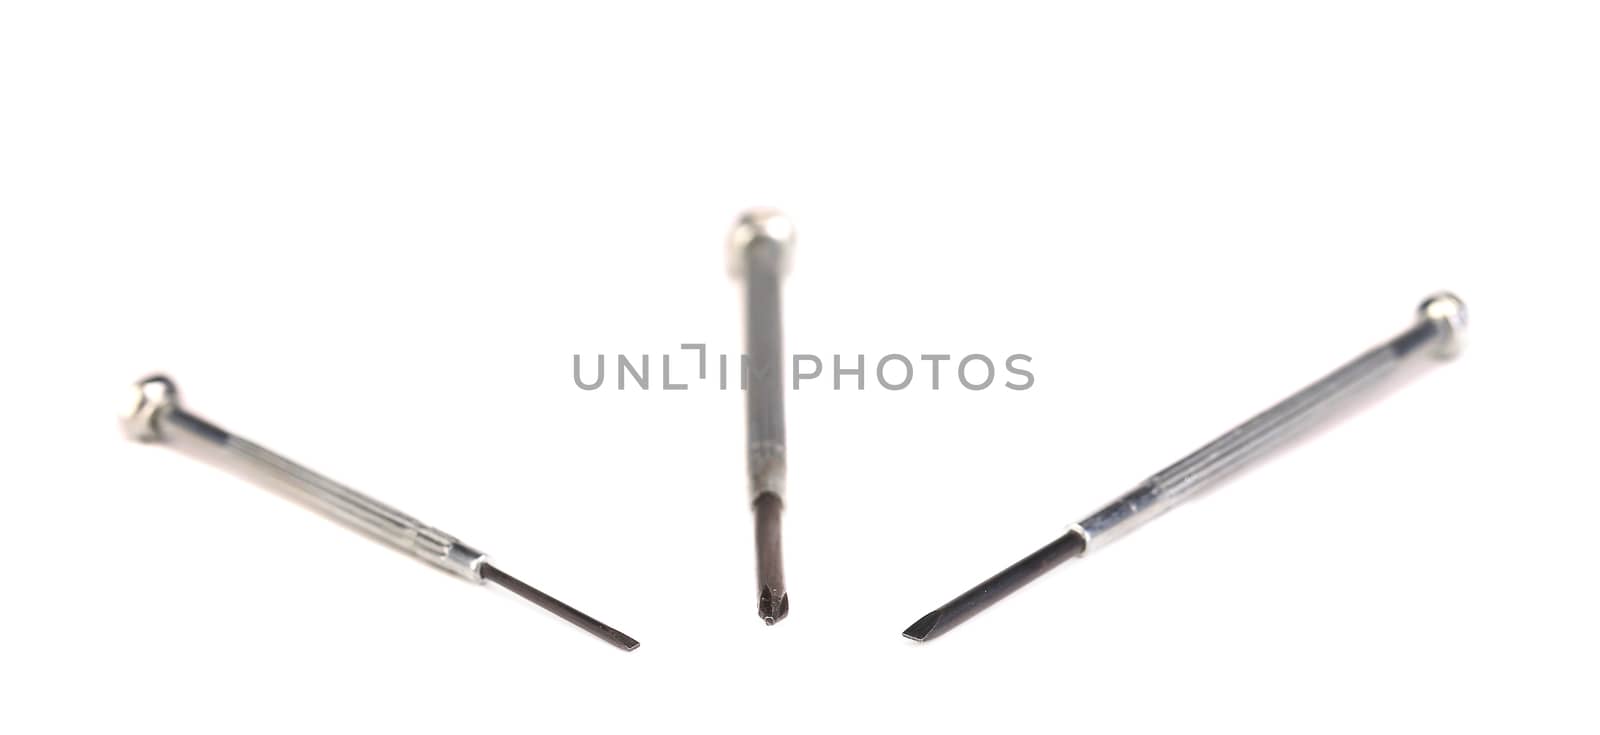 Close up of screw tips. Isolated on a white background.